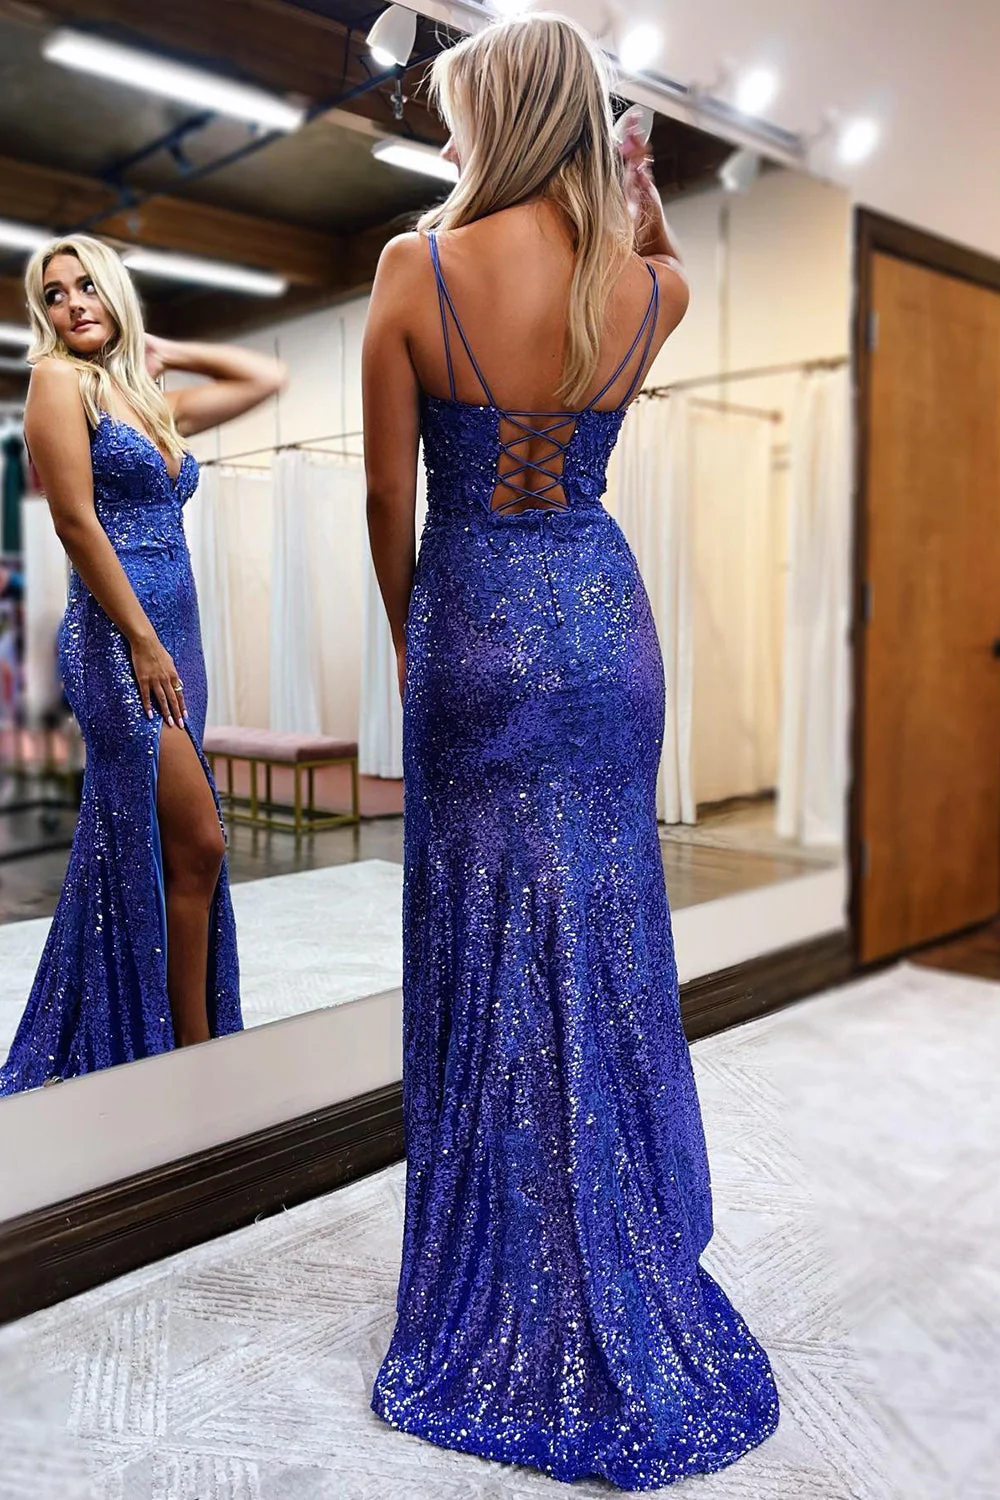 Sheath Spaghetti Straps Sequins Long Prom Dress with Silt nv756